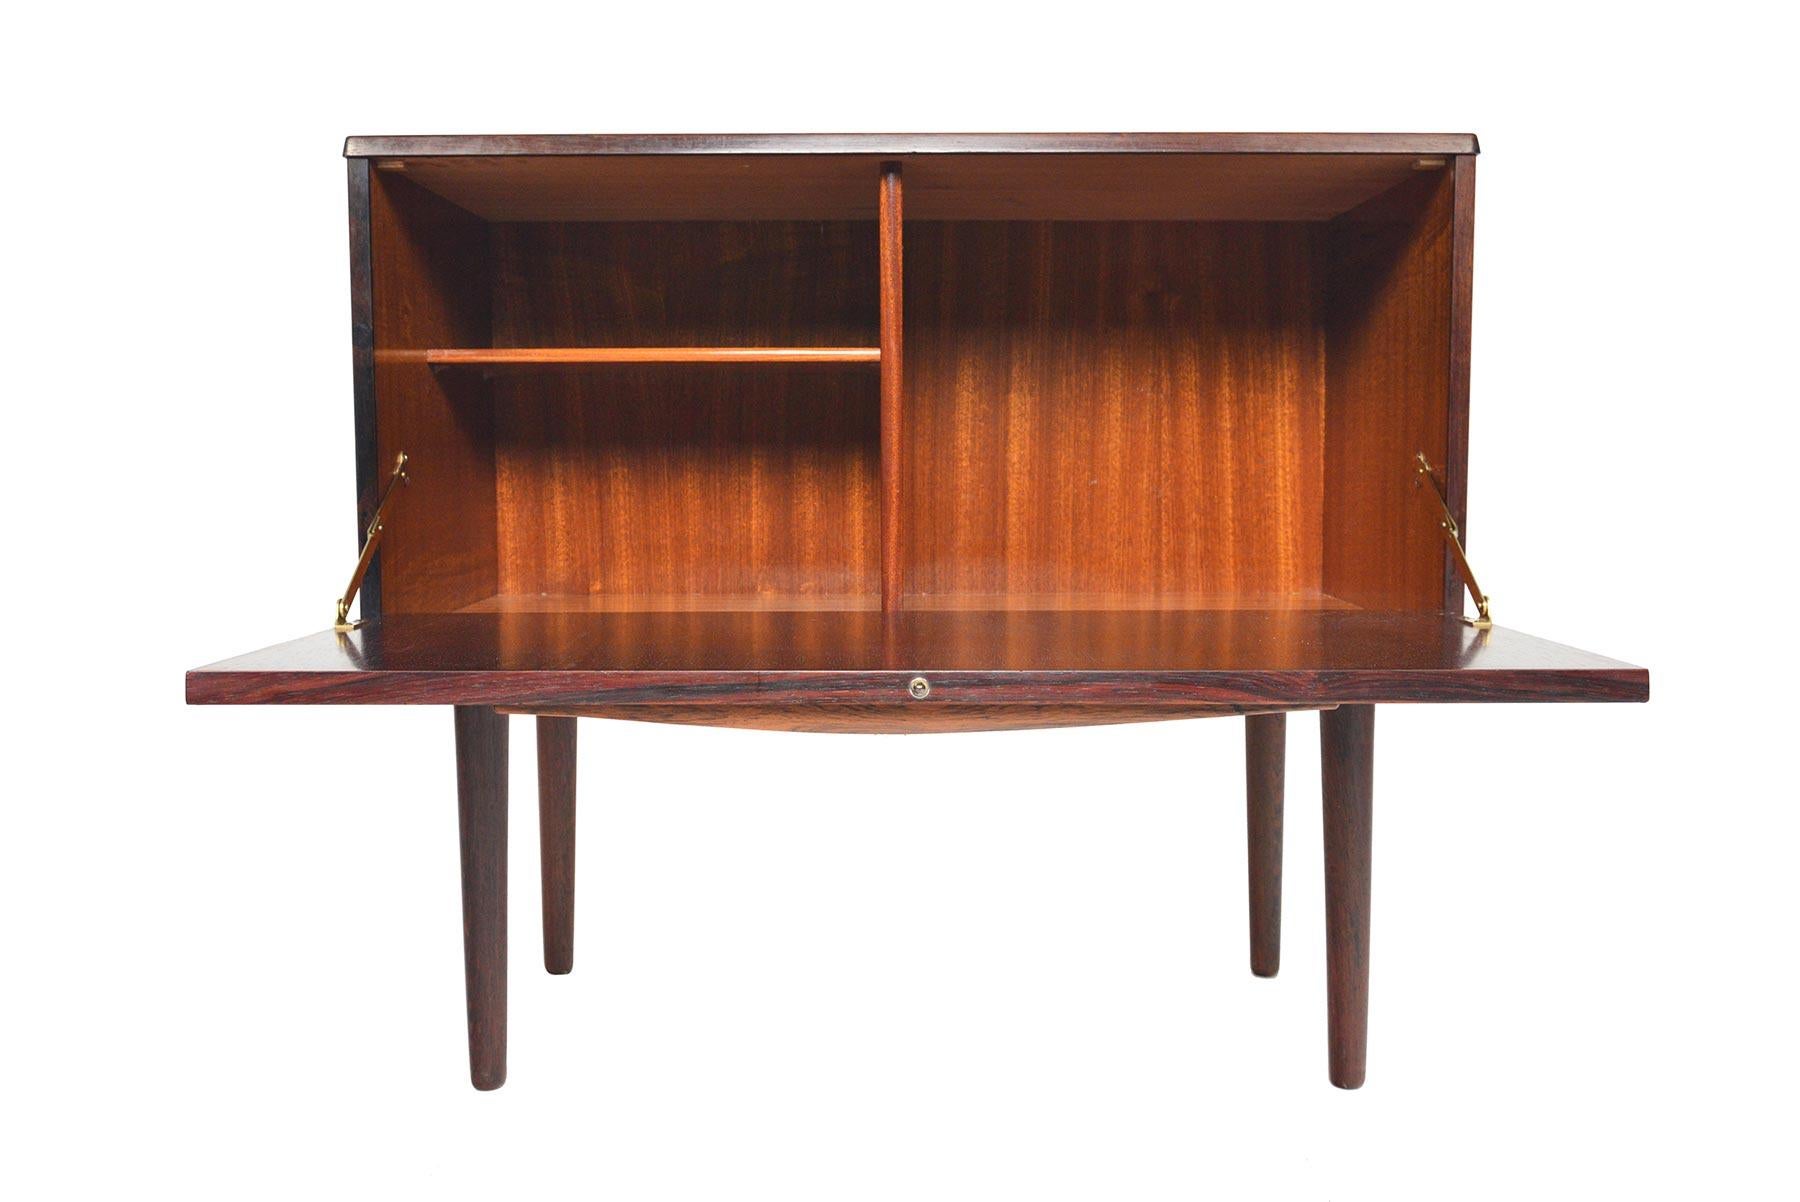 This Danish modern Brazilian rosewood cupboard by Lyby Møbler is an excellent storage piece for the modern home. The door drops to reveal two bays with open storage and an adjustable shelf. In excellent original condition with typical wear for its